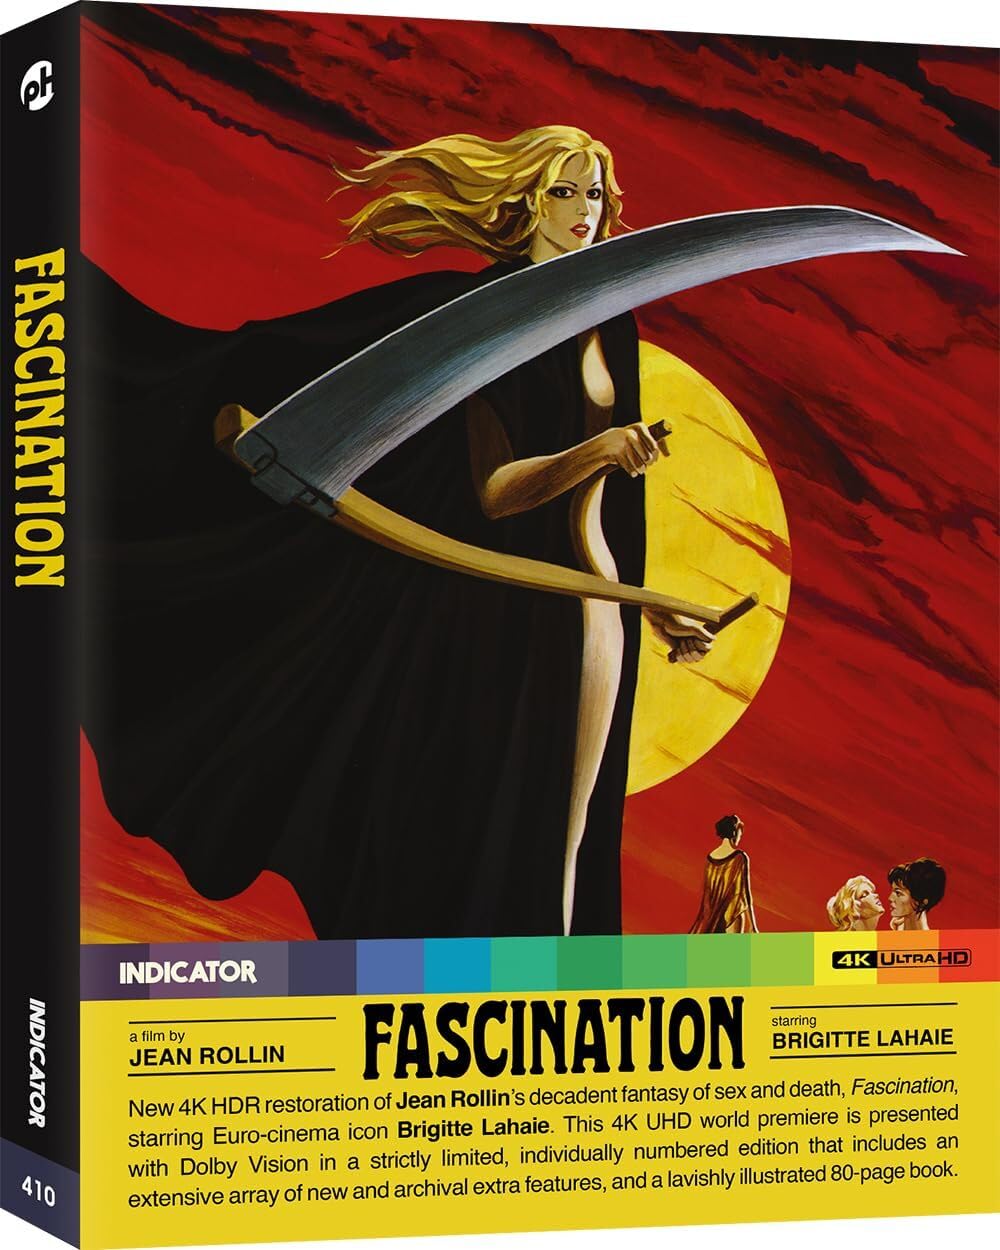 FASCINATION (LIMITED EDITION) 4K UHD